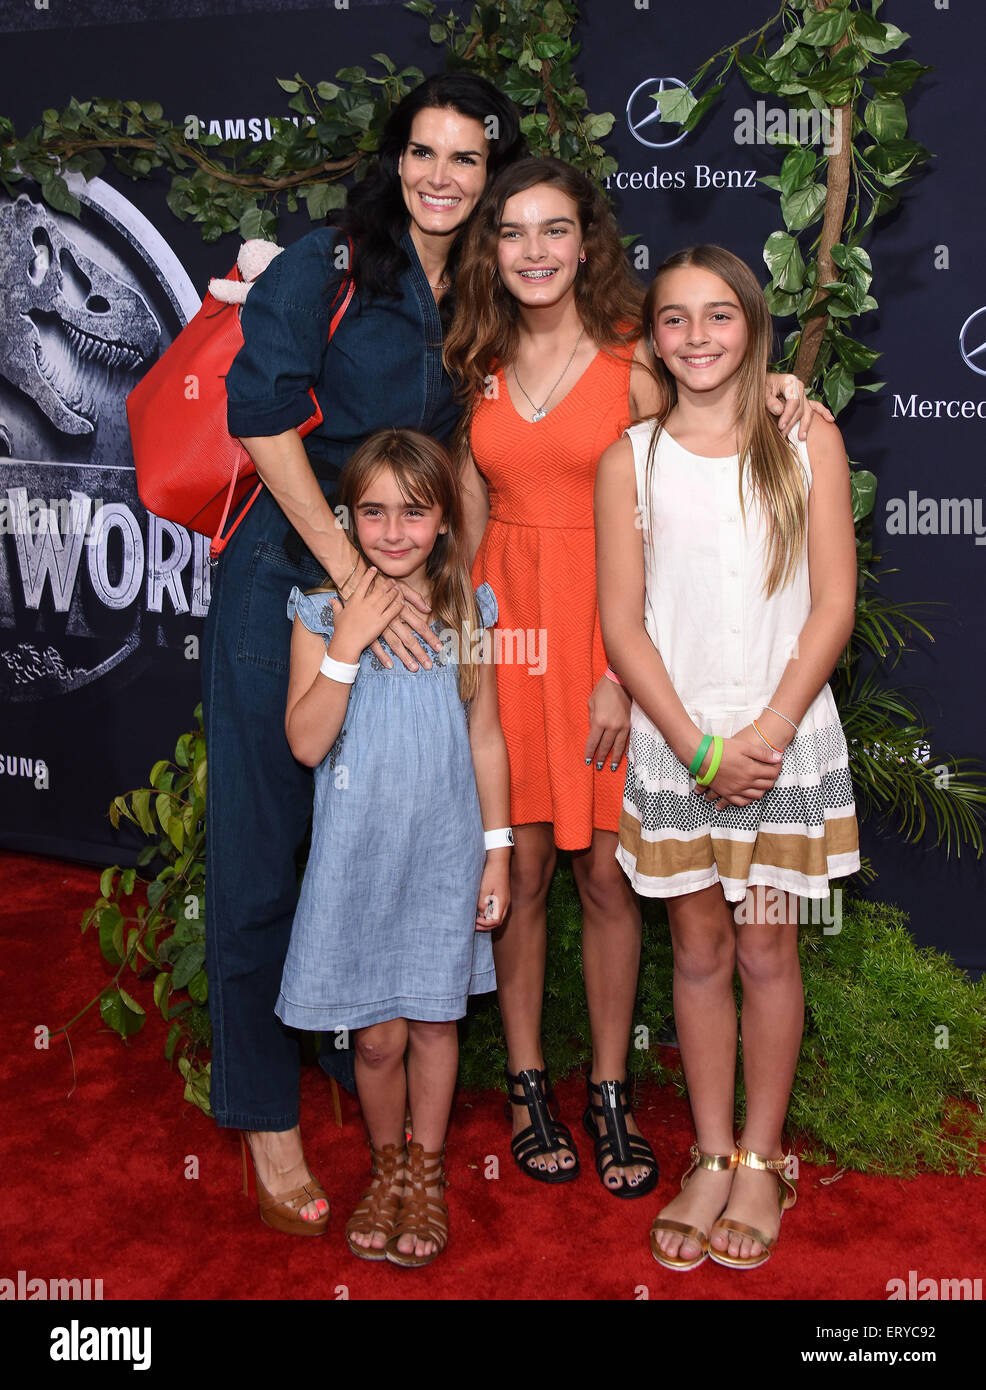 Hollywood, California, USA. 9th June, 2015. Angie Harmon, Emery Sehorn, Finley Sehorn and Avery Sehorn arrives for the premiere of the film 'Jurassic World' at the Dolby theater. Credit:  Lisa O'Connor/ZUMA Wire/Alamy Live News Stock Photo